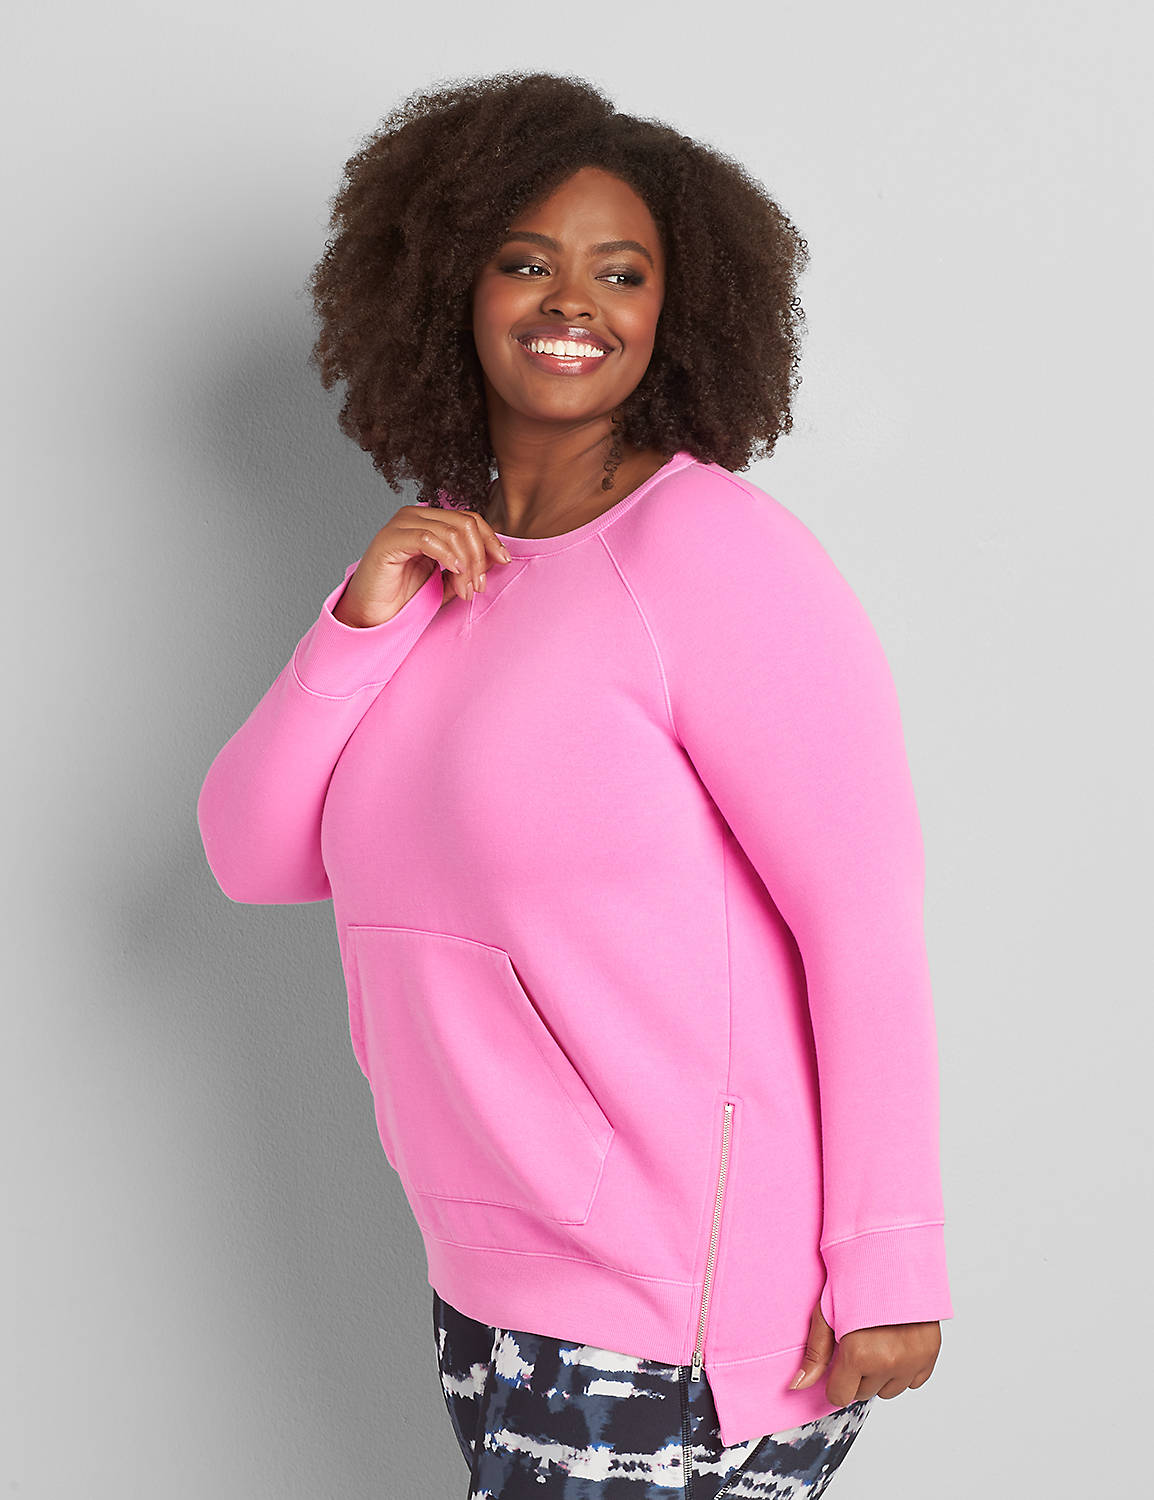 Long Sleeve Crew Neck Zipper Detail French Terry Tunic S 1116883:Bold Pink 62-0005-15:14/16 Product Image 1